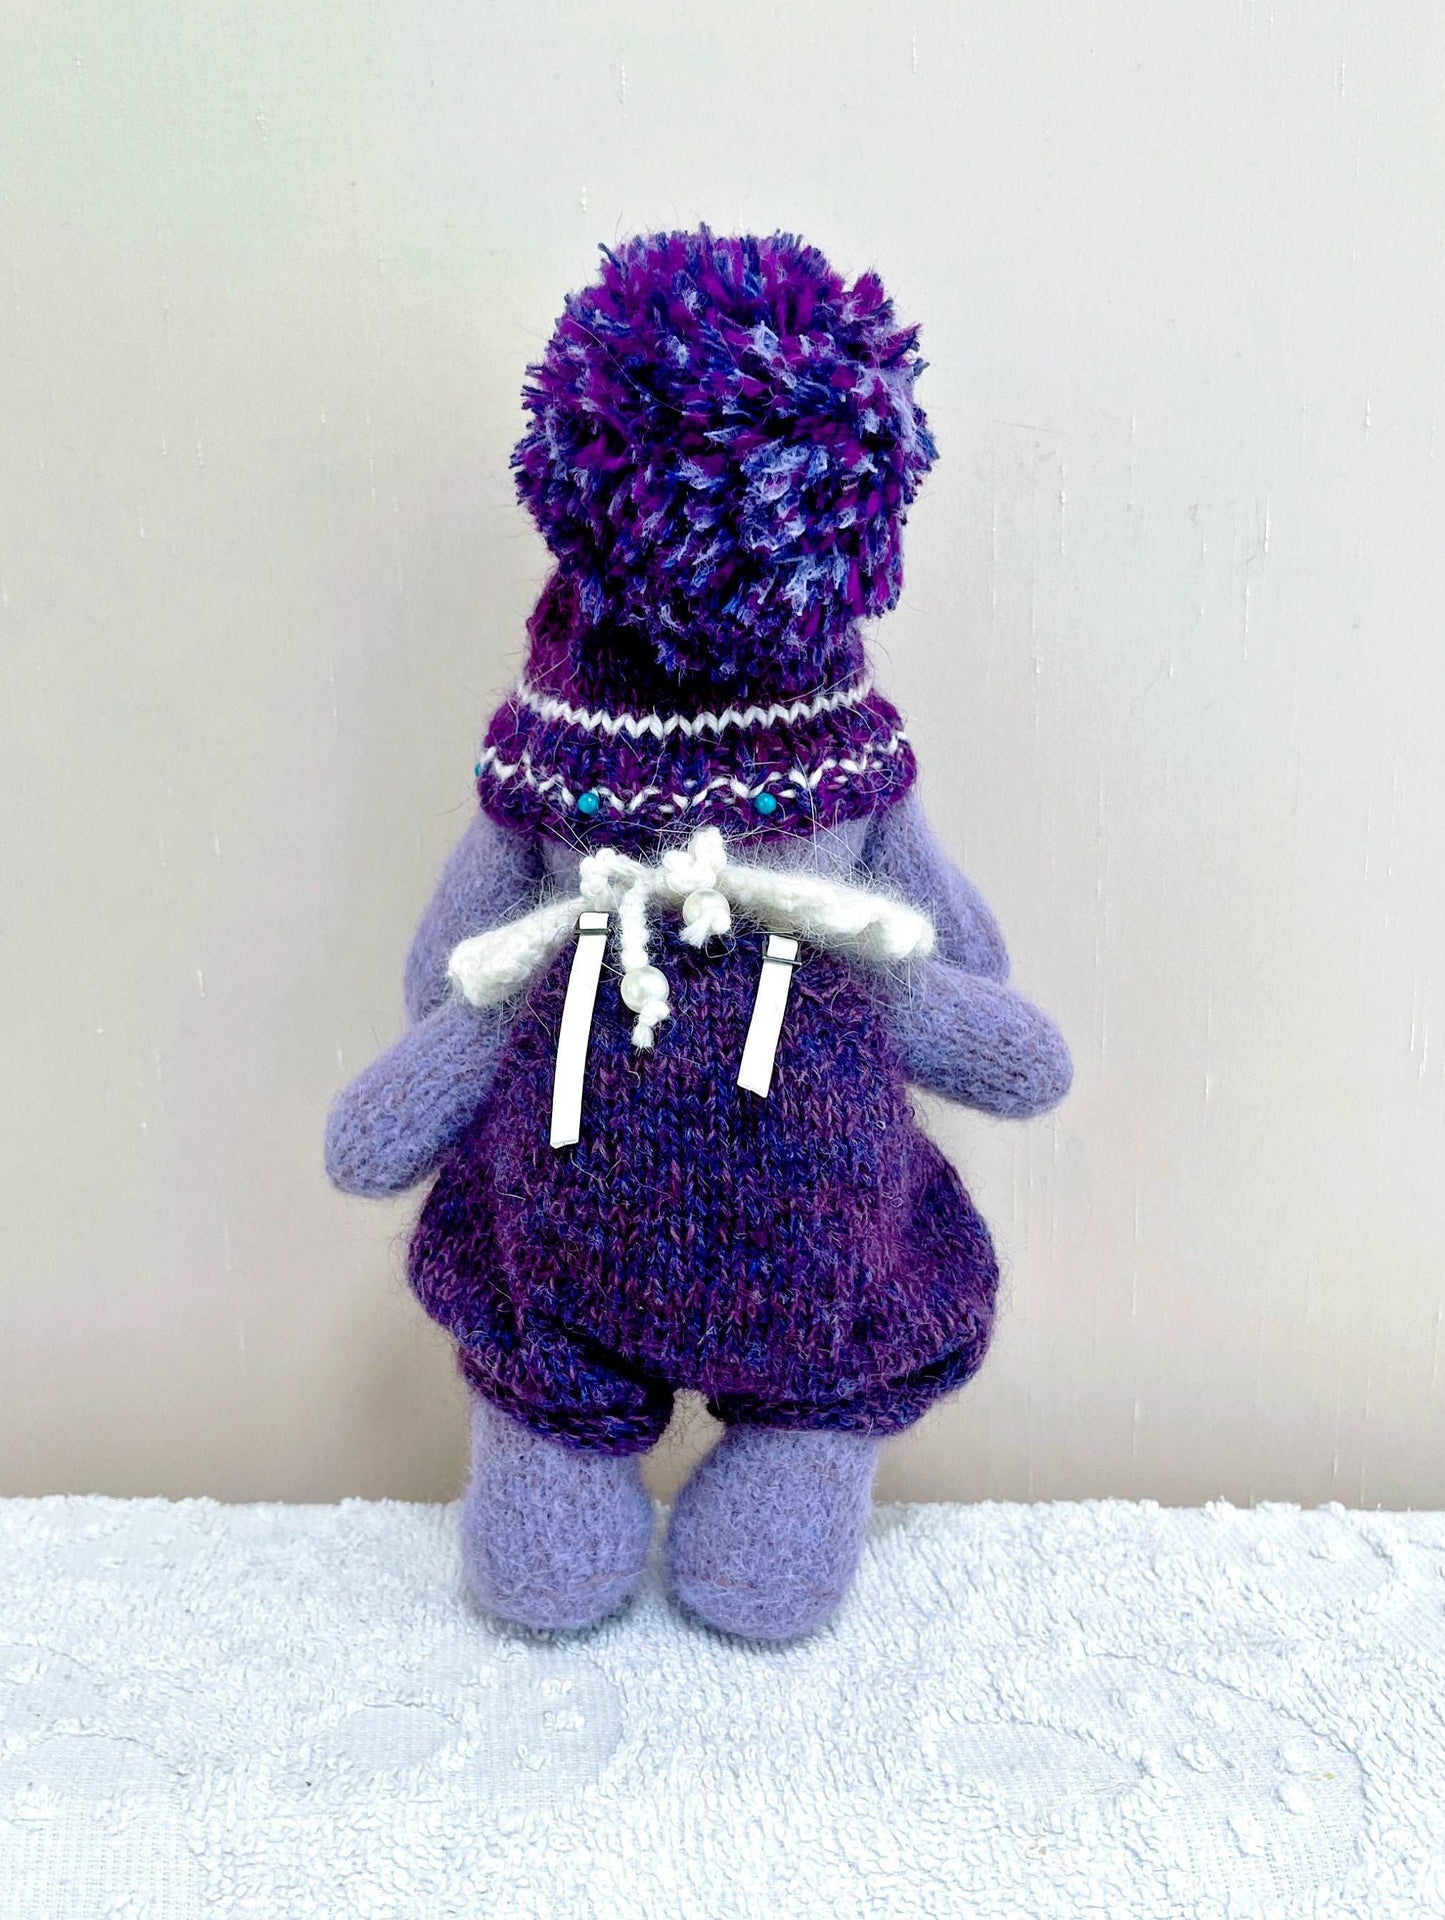 Handcrafted Lavender Rabbit Doll Ornament for Display